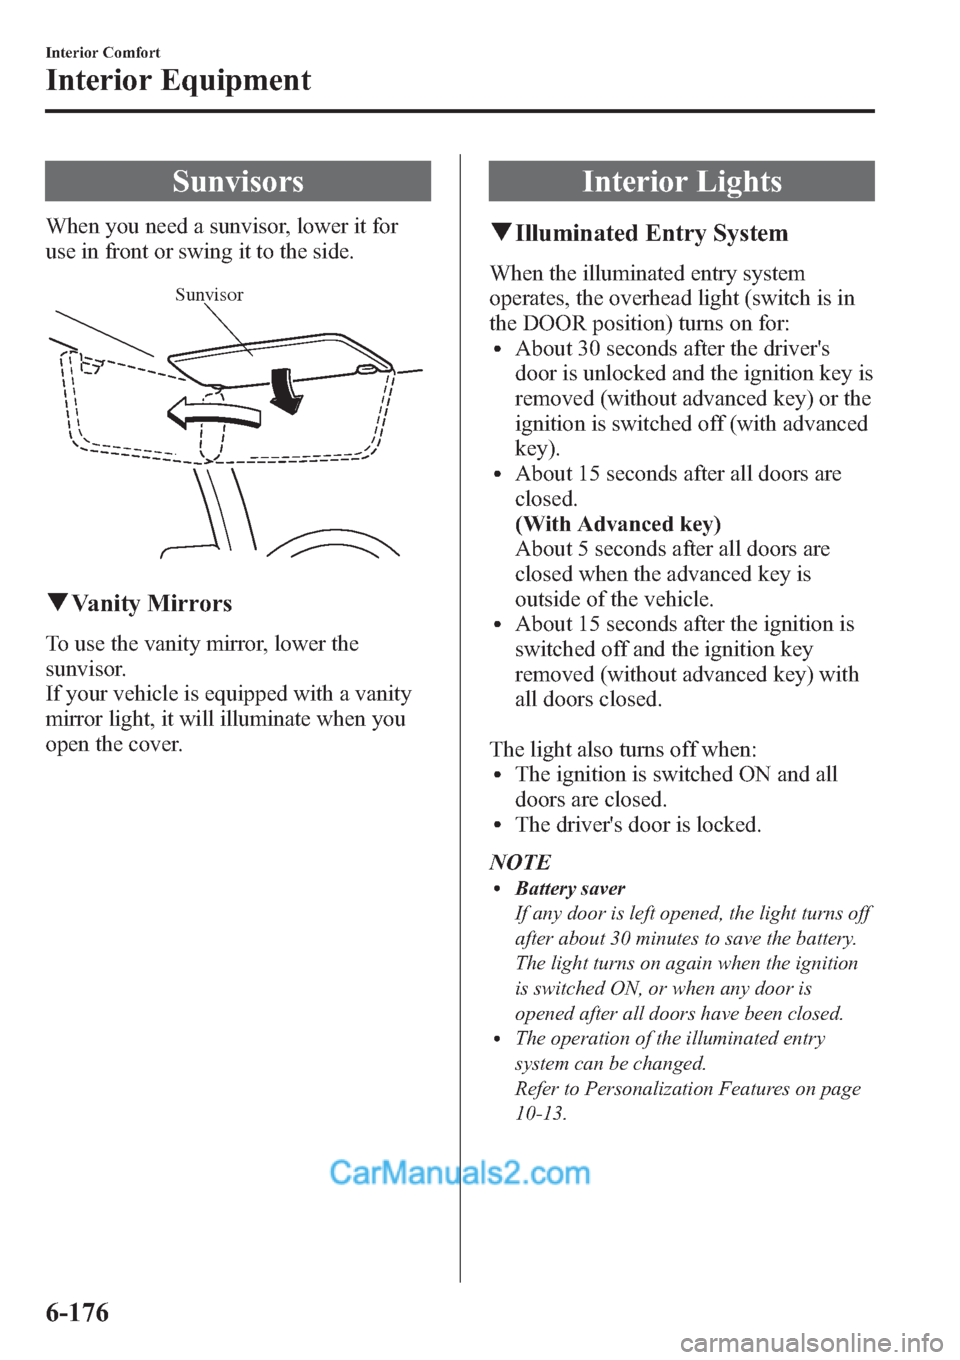 MAZDA MODEL MAZDASPEED 3 2013  Owners Manual (in English) Sunvisors
When you need a sunvisor, lower it for
use in front or swing it to the side.
Sunvisor
qVanity Mirrors
To use the vanity mirror, lower the
sunvisor.
If your vehicle is equipped with a vanity
